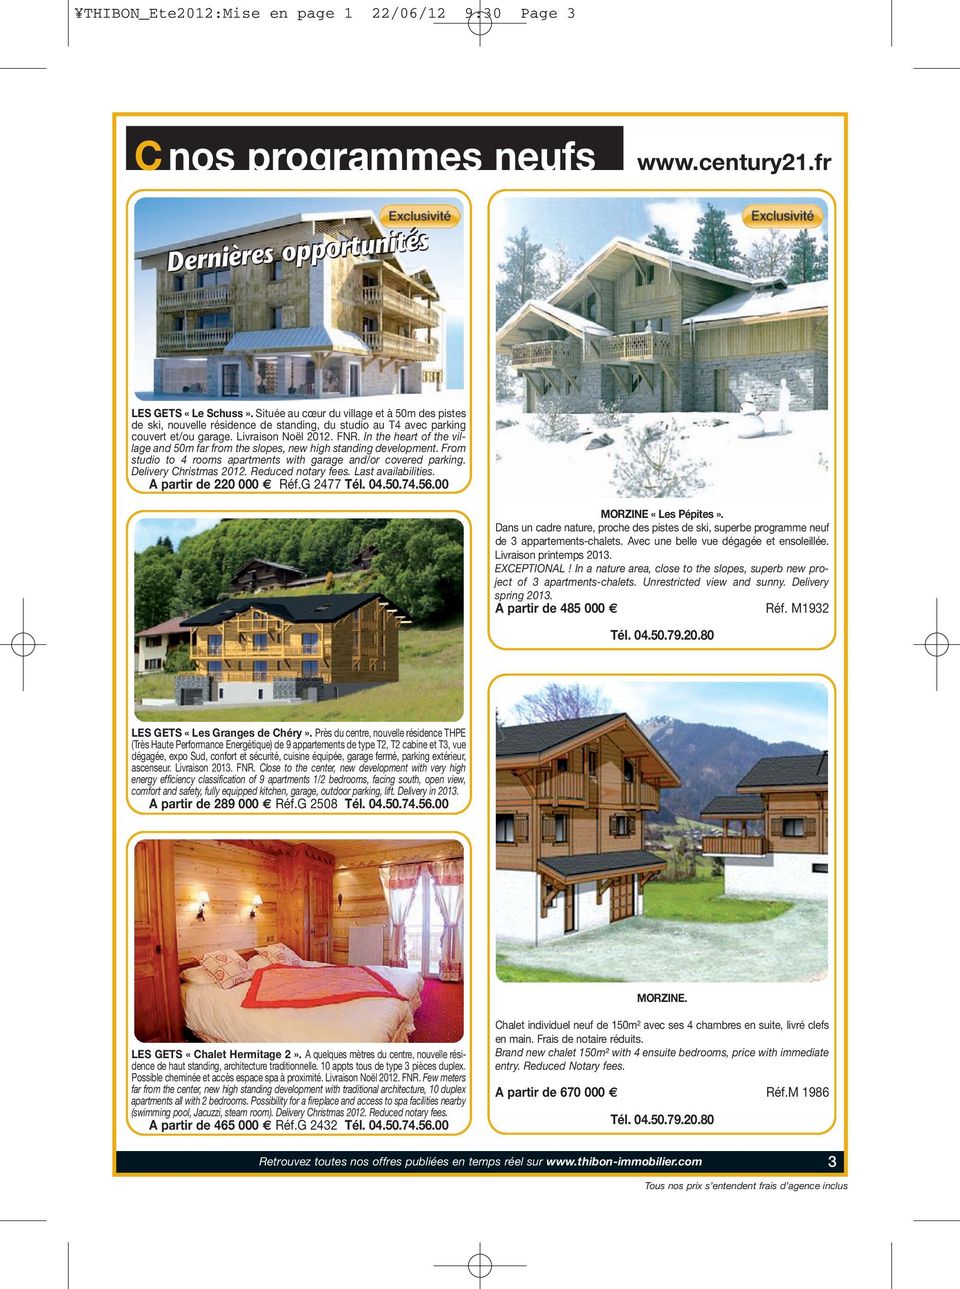 In the heart of the village and 50m far from the slopes, new high standing development. From studio to 4 rooms apartments with garage and/or covered parking. Delivery Christmas 2012.